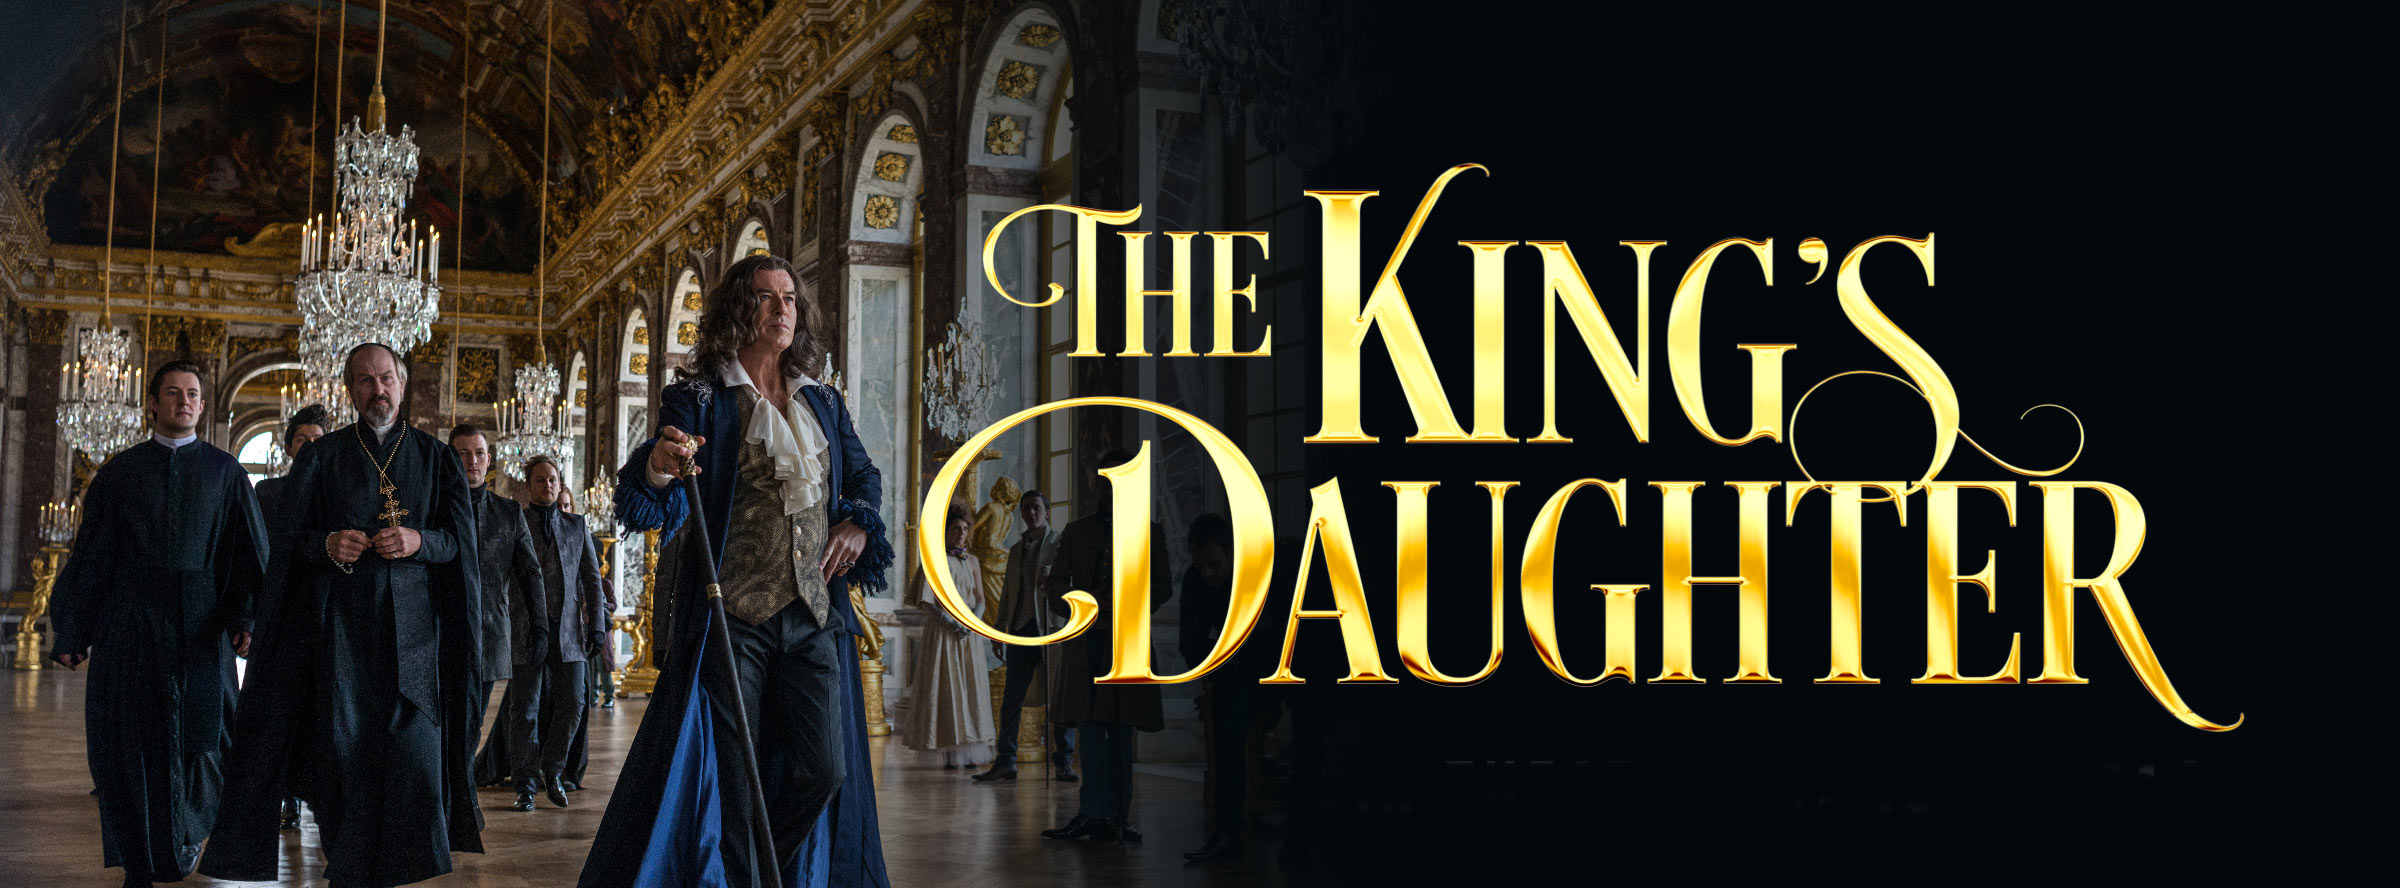 Slider Image for King's Daughter, The                                                       